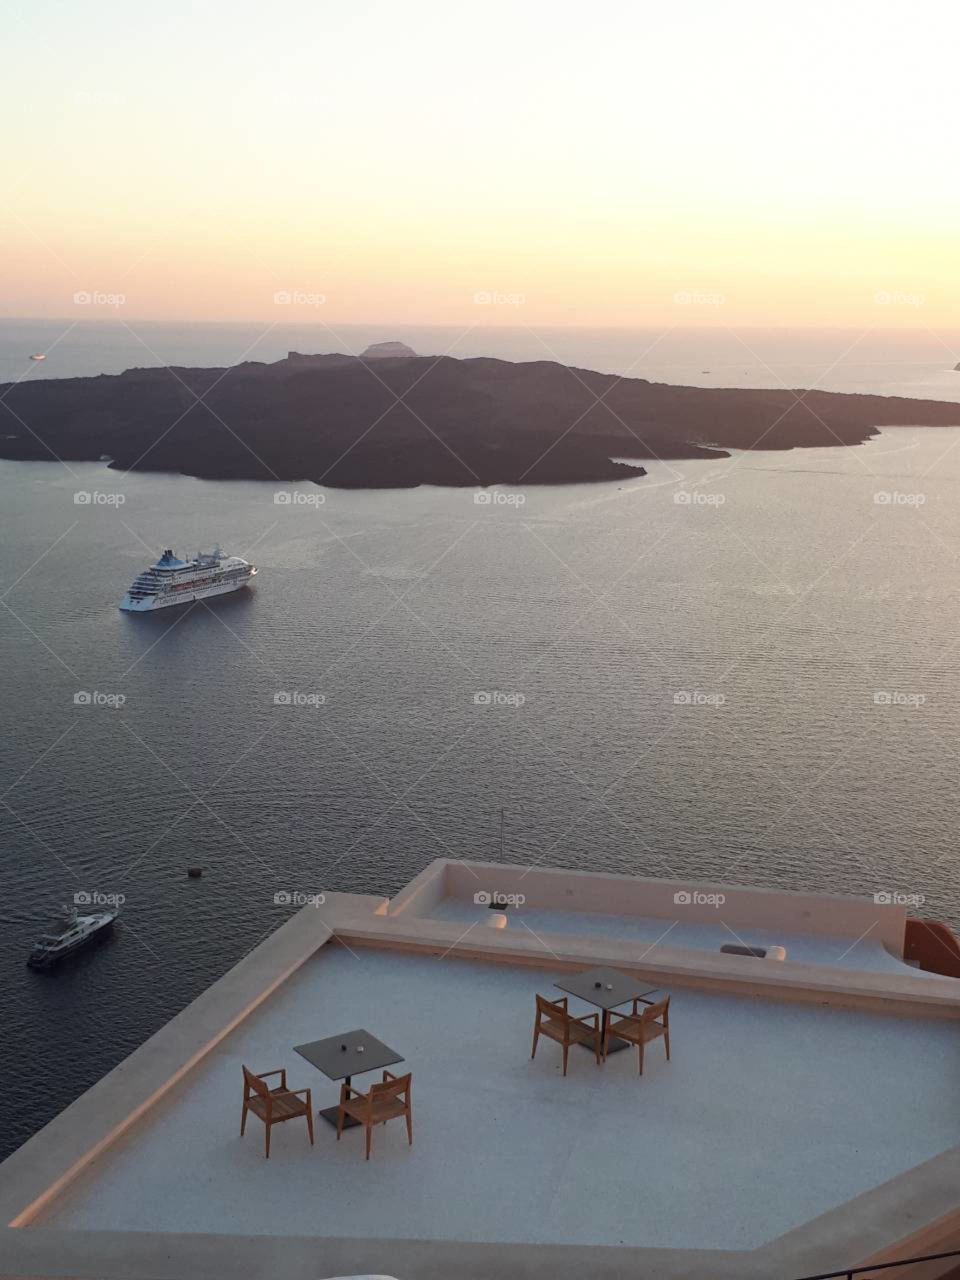 The most amazing terrace in the world. Stunning view. 
Sailing ships under the rose gold colours of the sunset. 
So romantic.